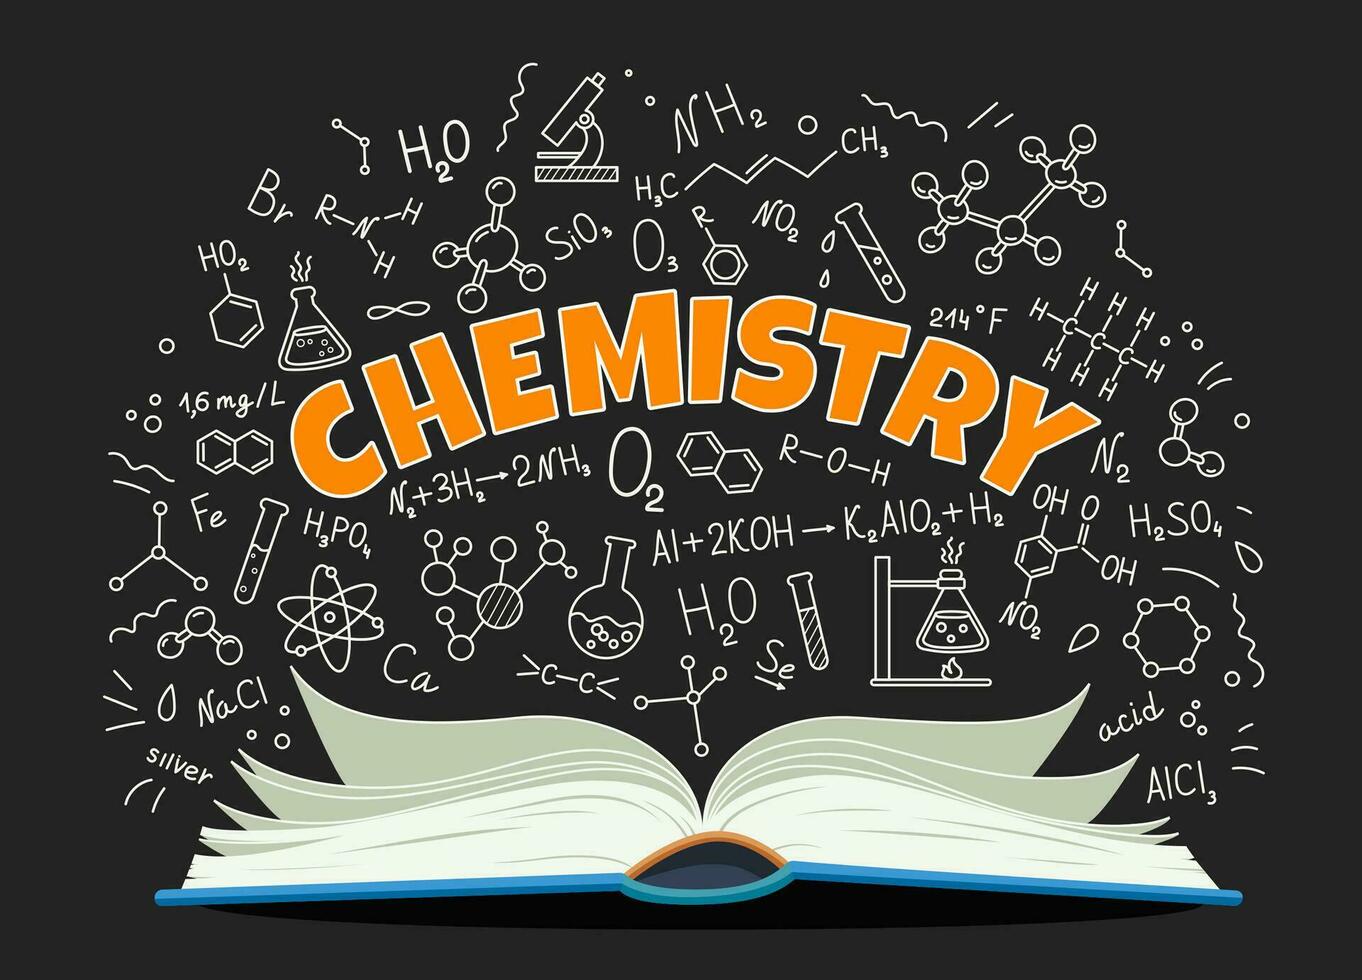 Chemistry textbook and formulas, school education vector